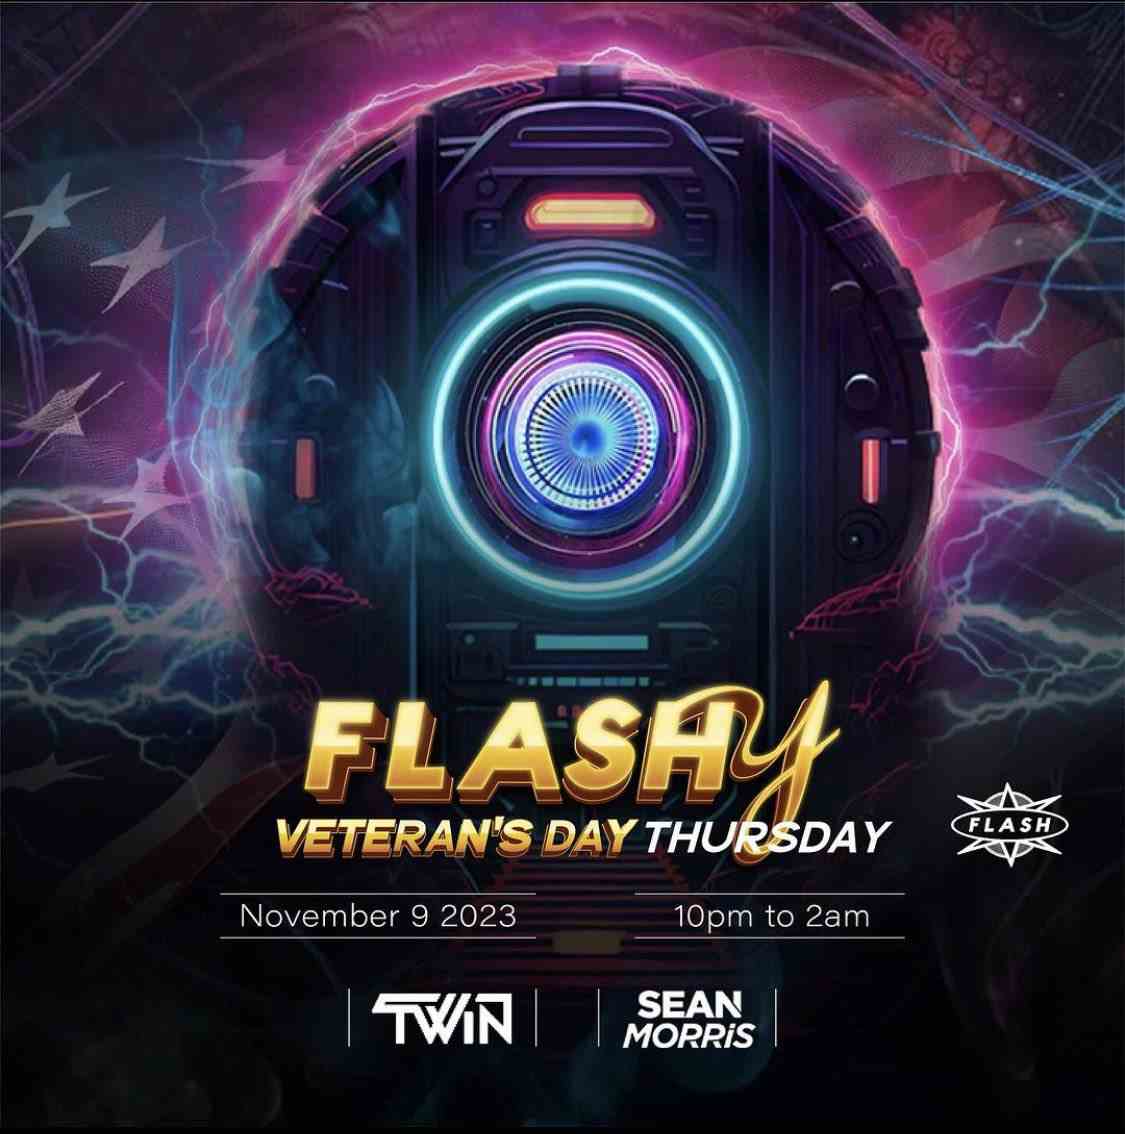 Flashy Thursday Veterans Day Weekend Rooftop Edition event flyer